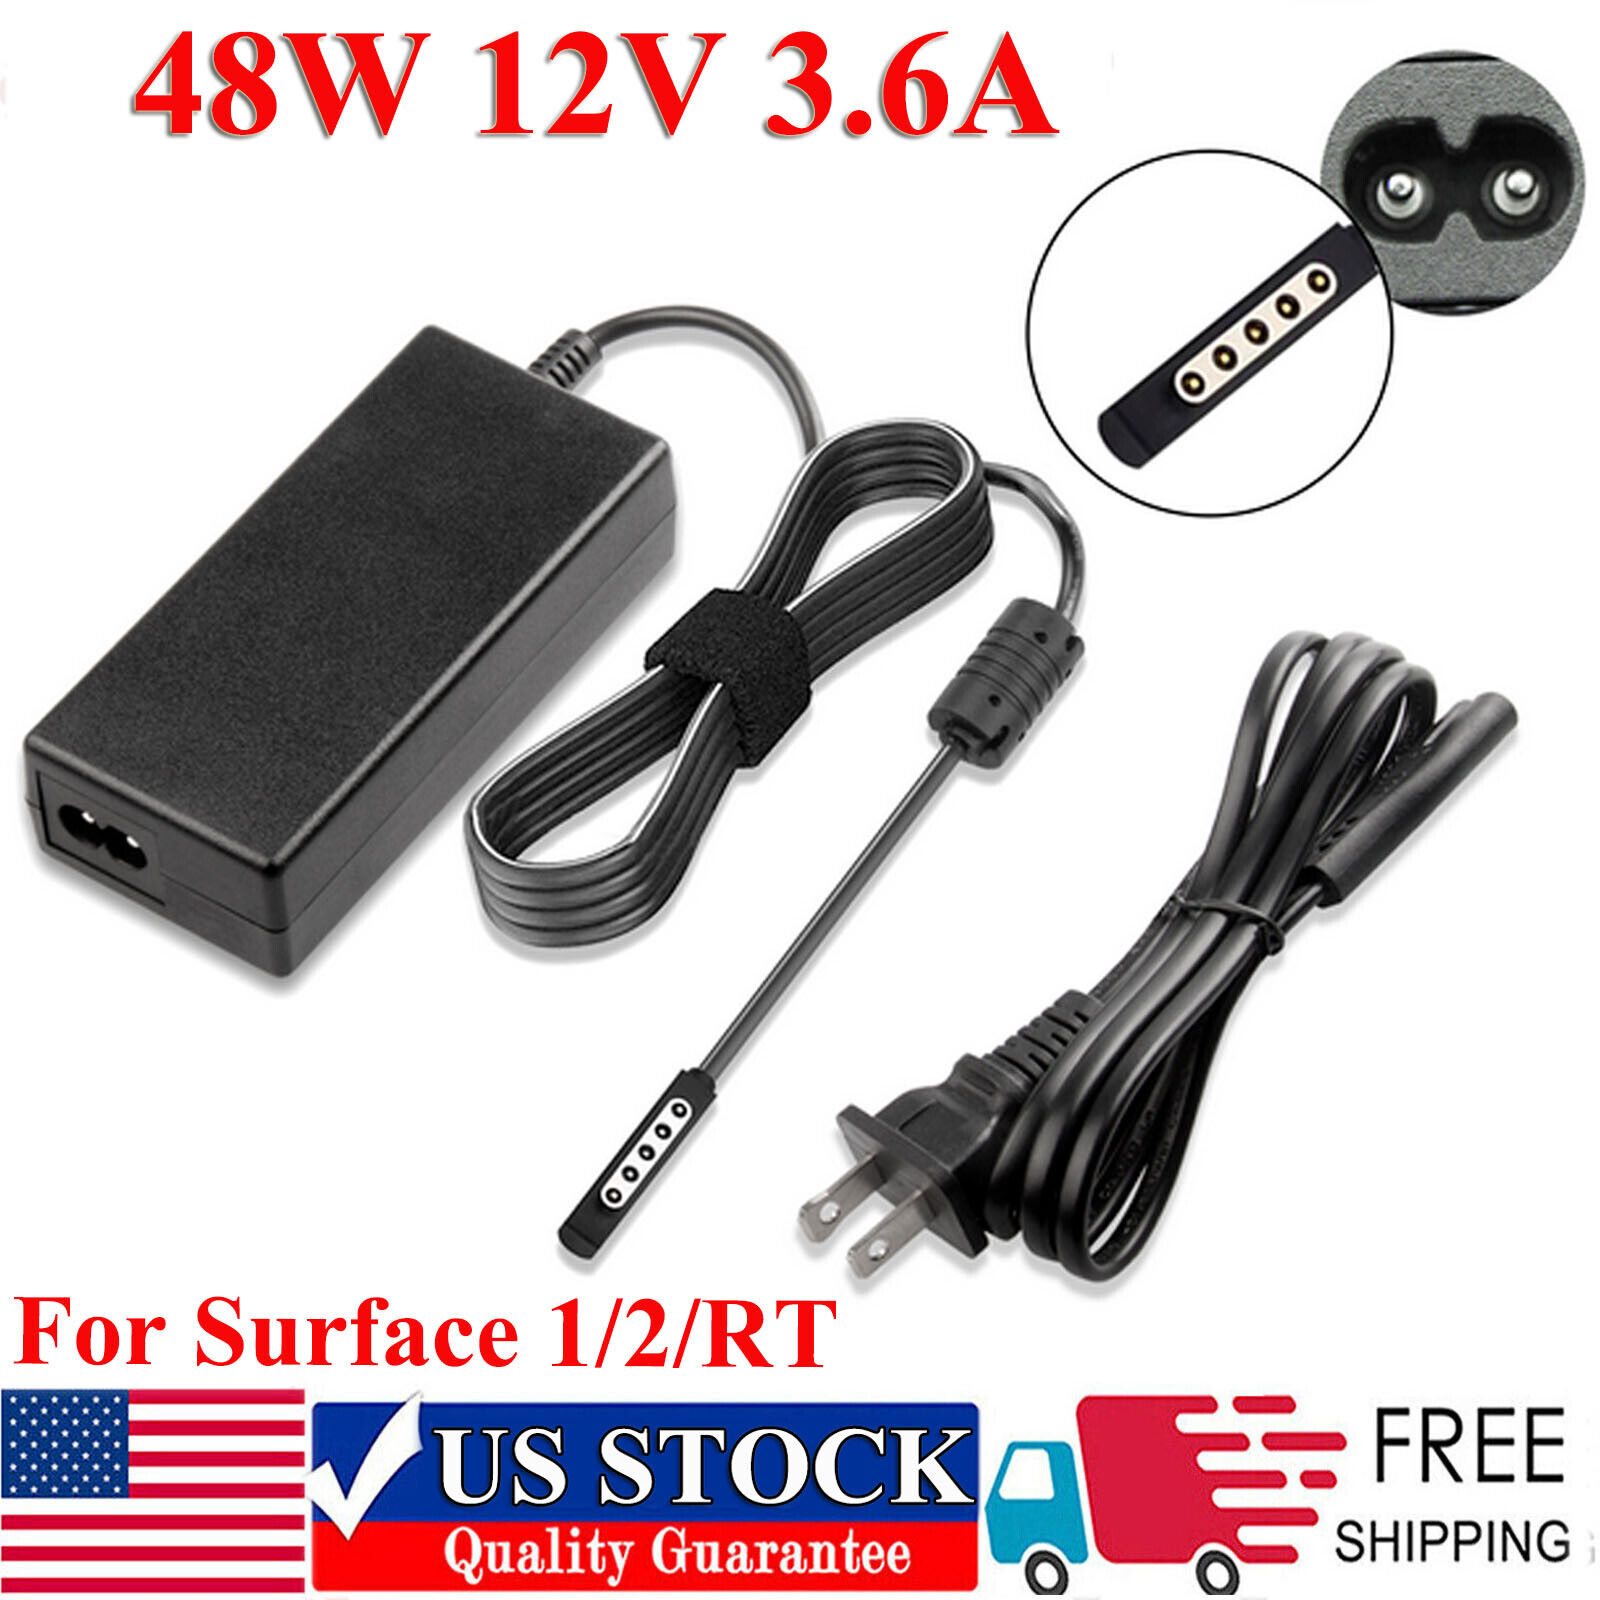 For Microsoft Surface Pro 1&2 1512 1516 RT Charger 12V 3.6A Power Supply Adapter